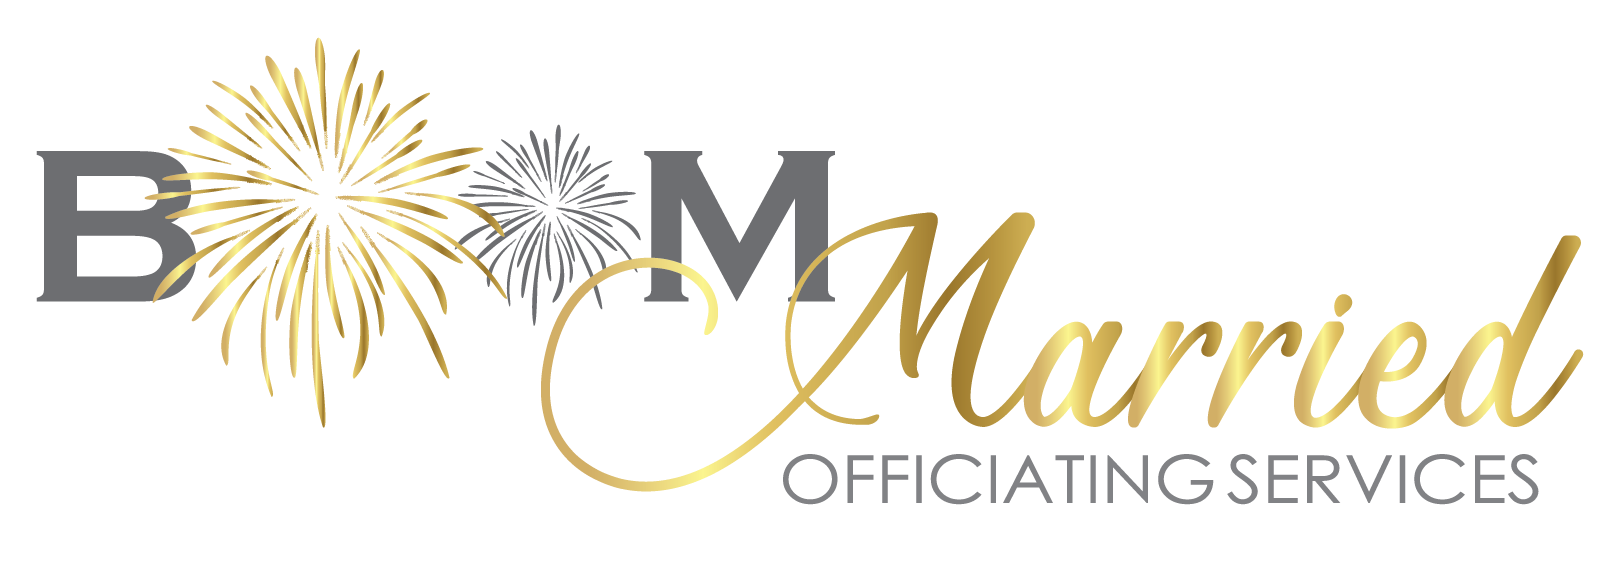 Boom Married Officiating Services